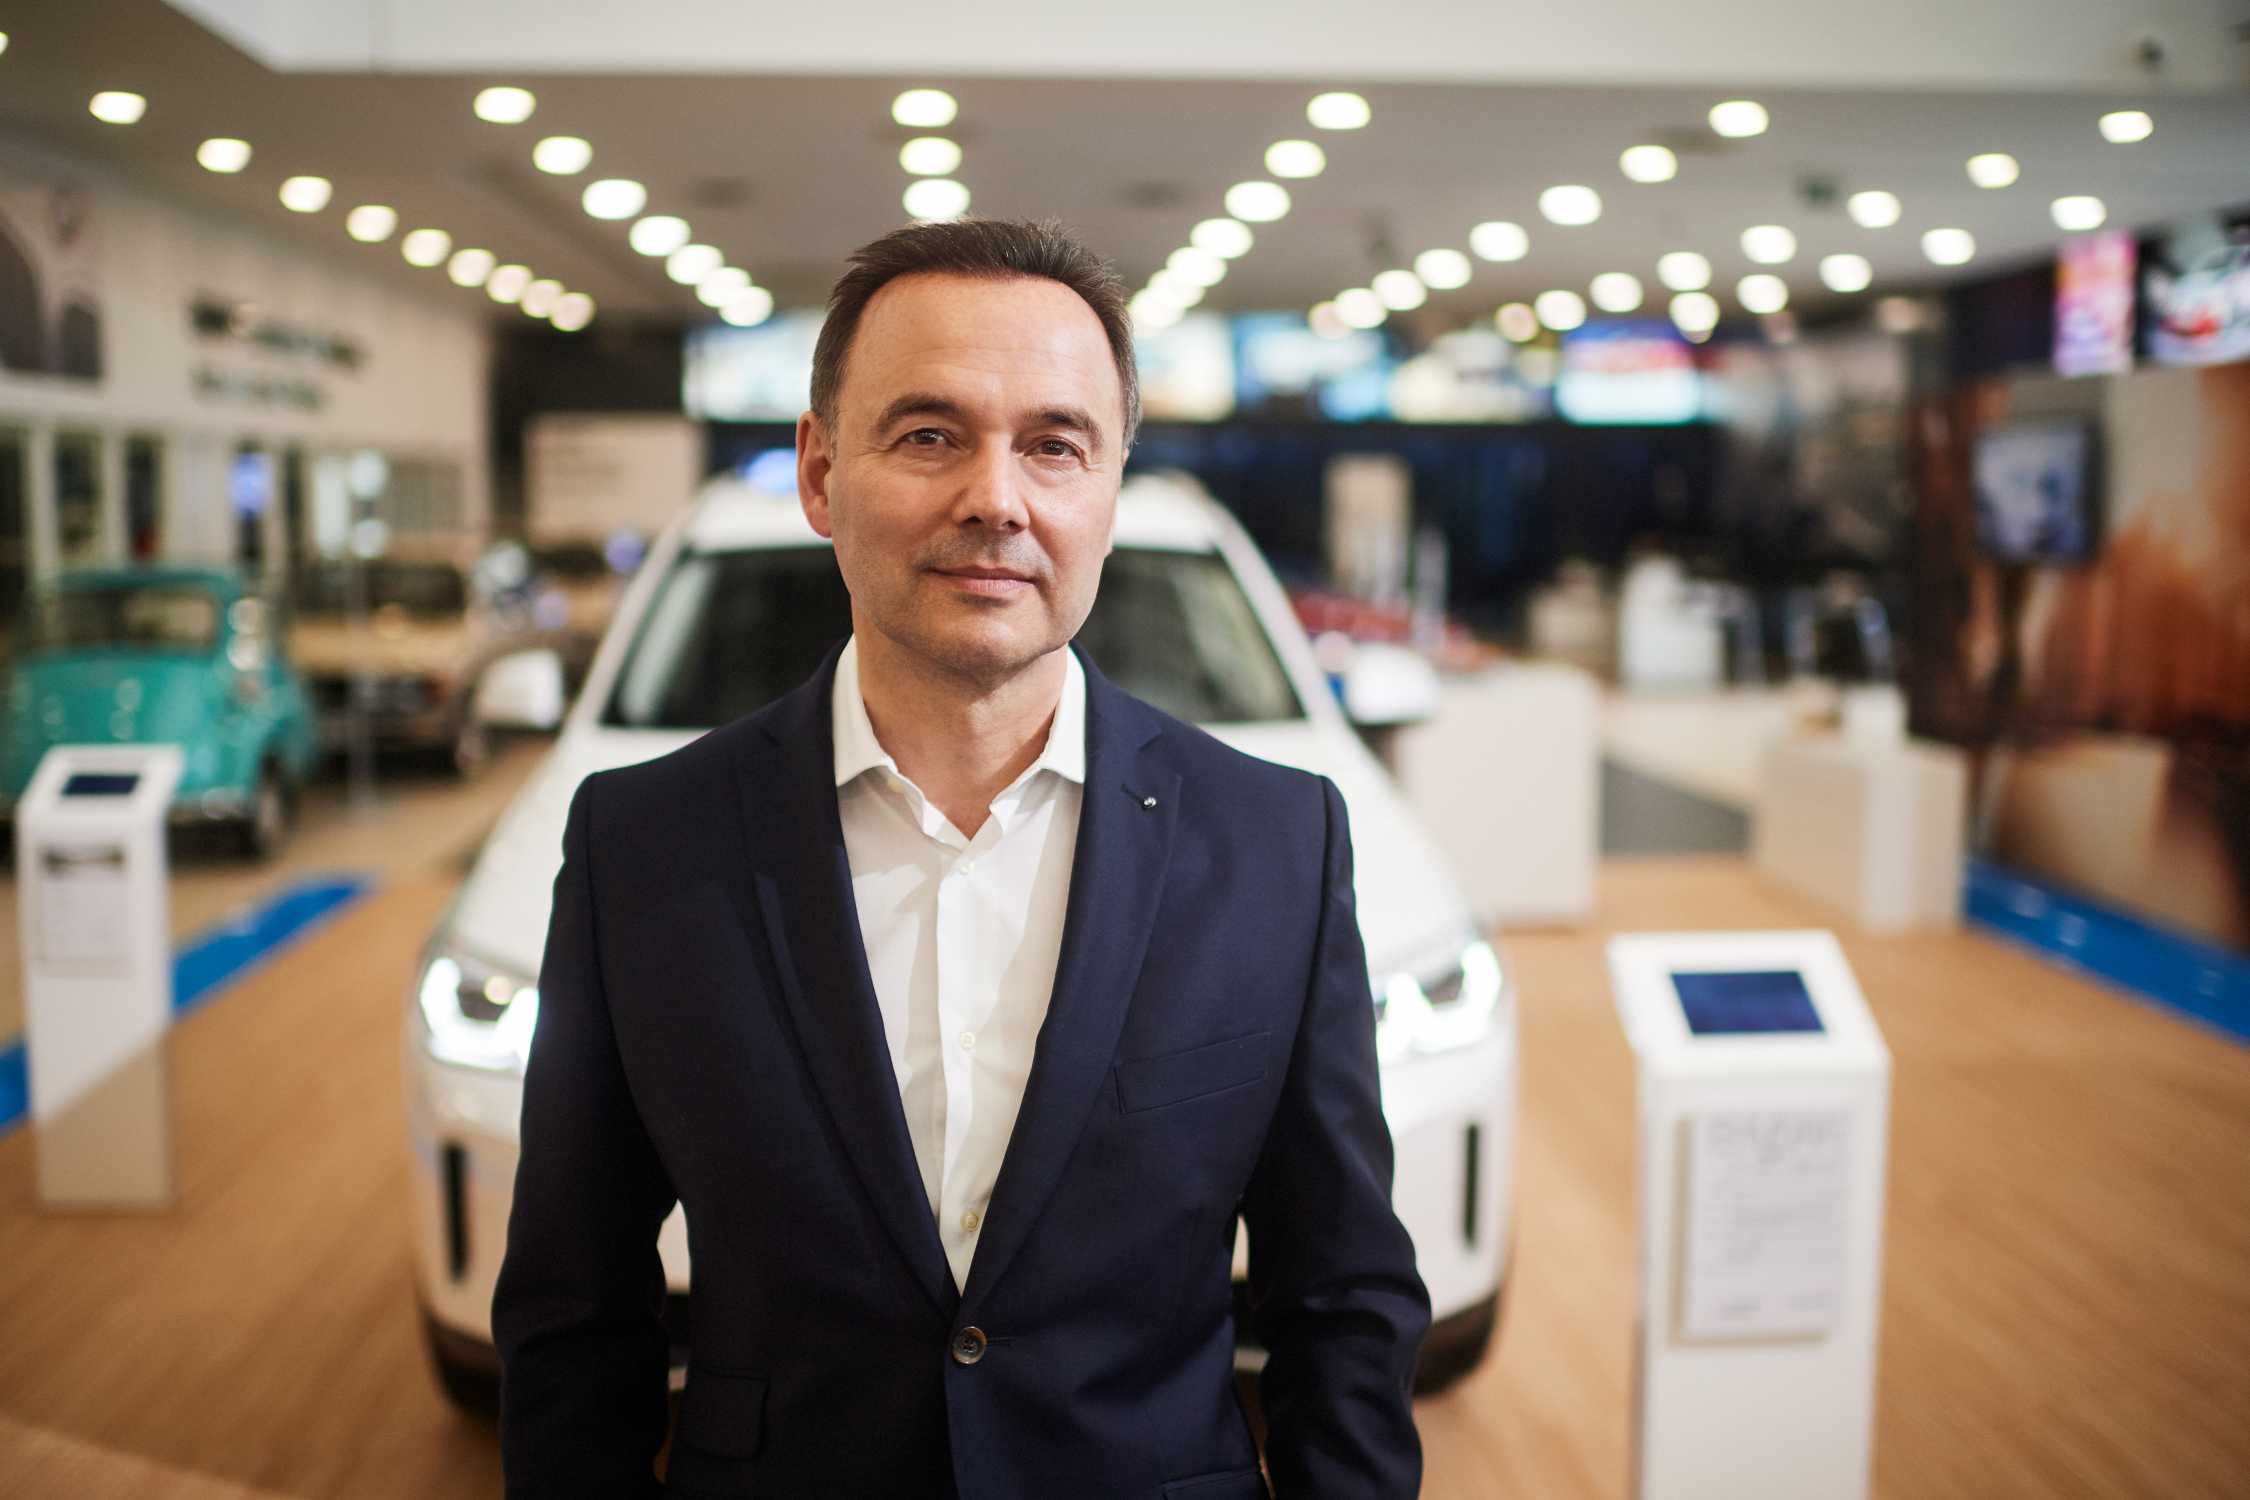 Dr Josef Reiter (Managing Director BMW Romania) – We encourage a culture of taking initiative